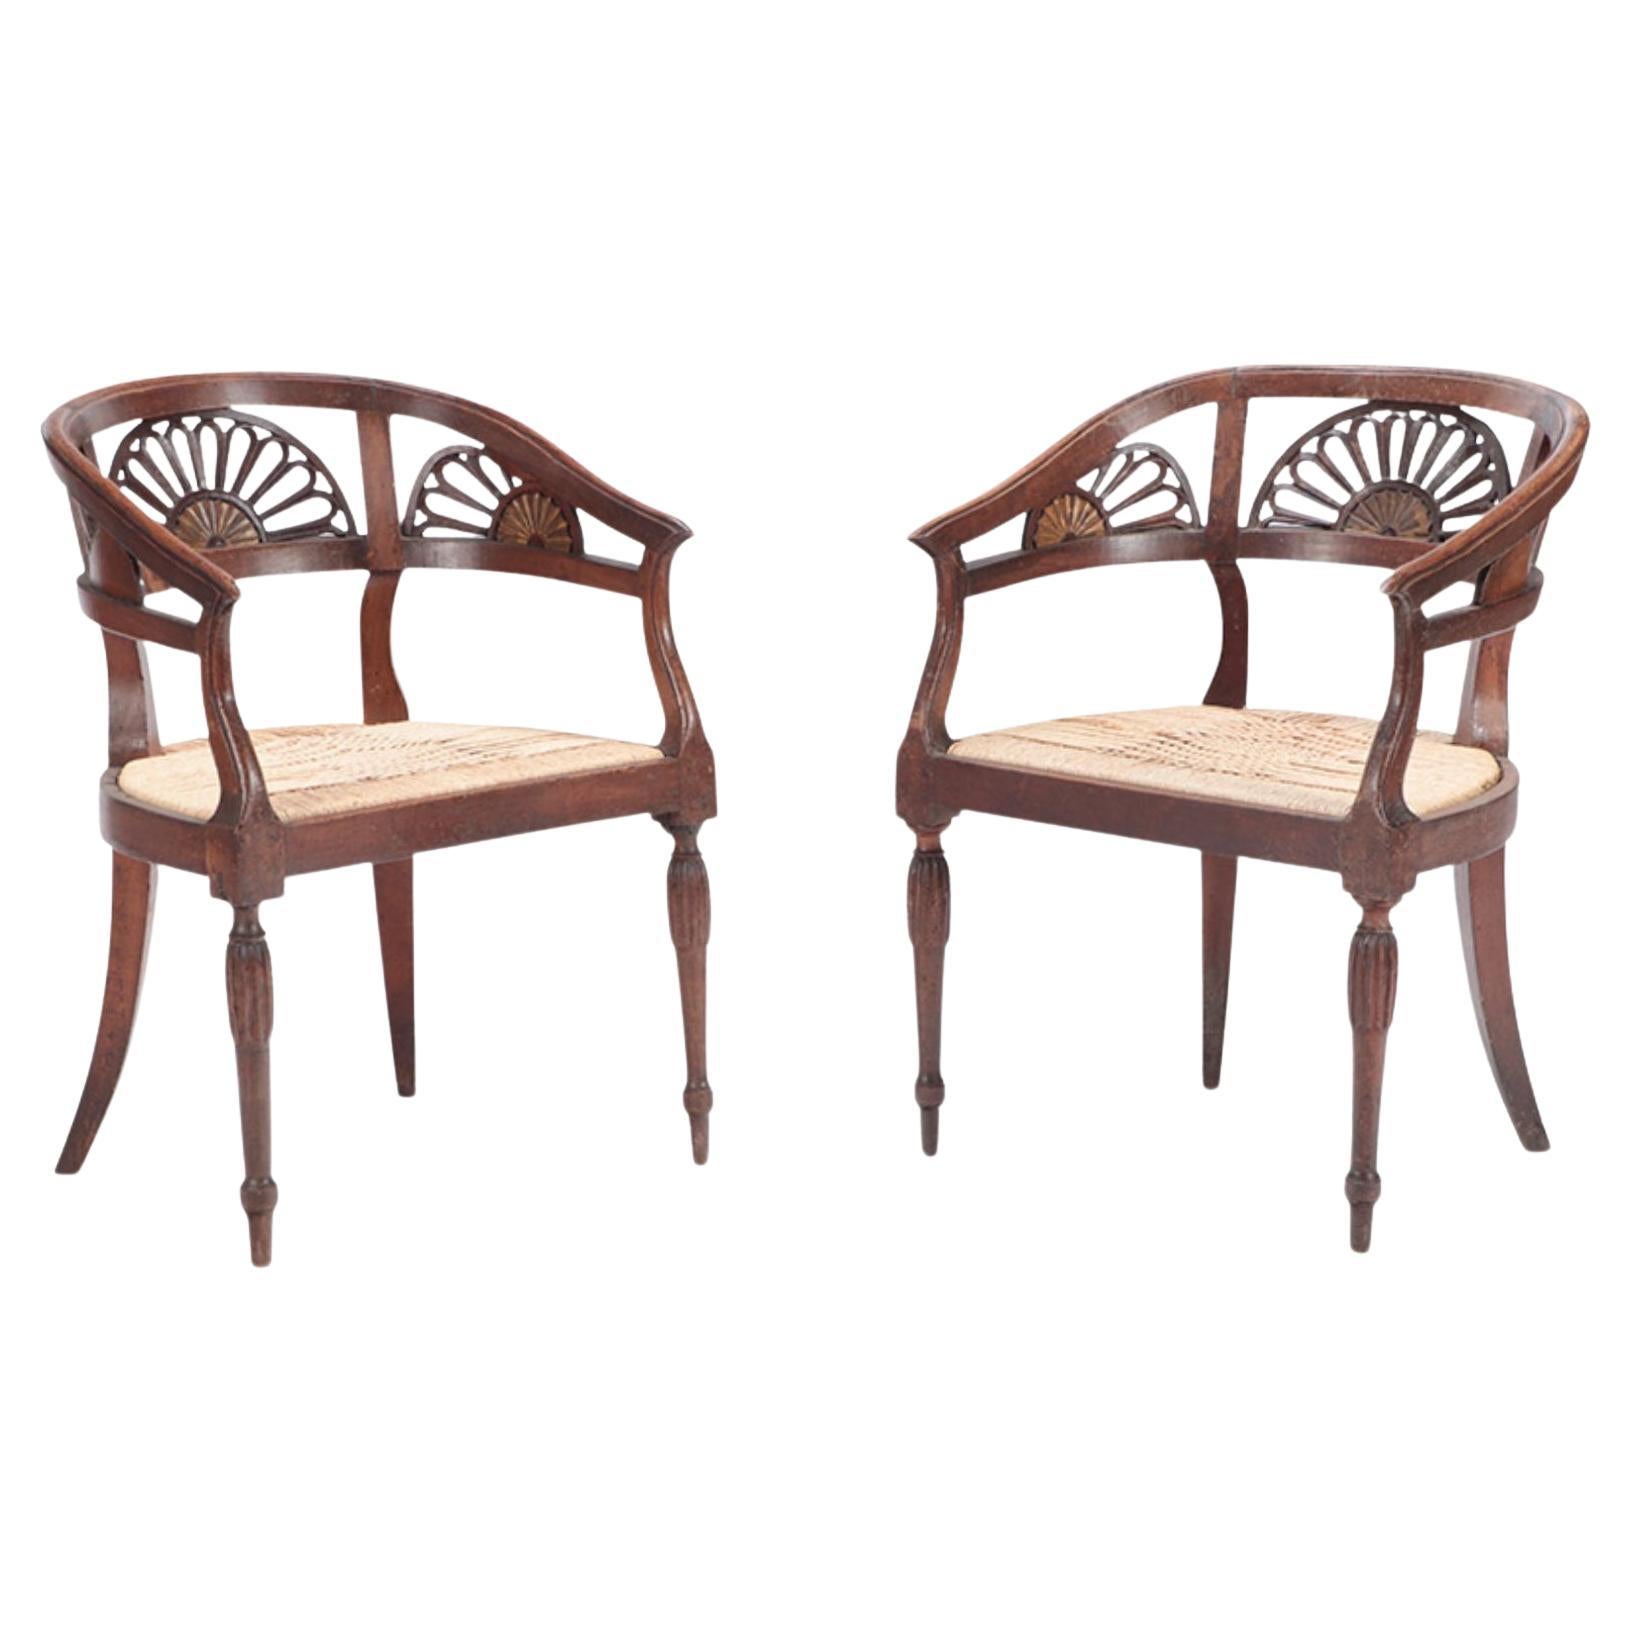 Pair of Italian Walnut Open Arm Chairs with Cord Seats, circa 1800 For Sale